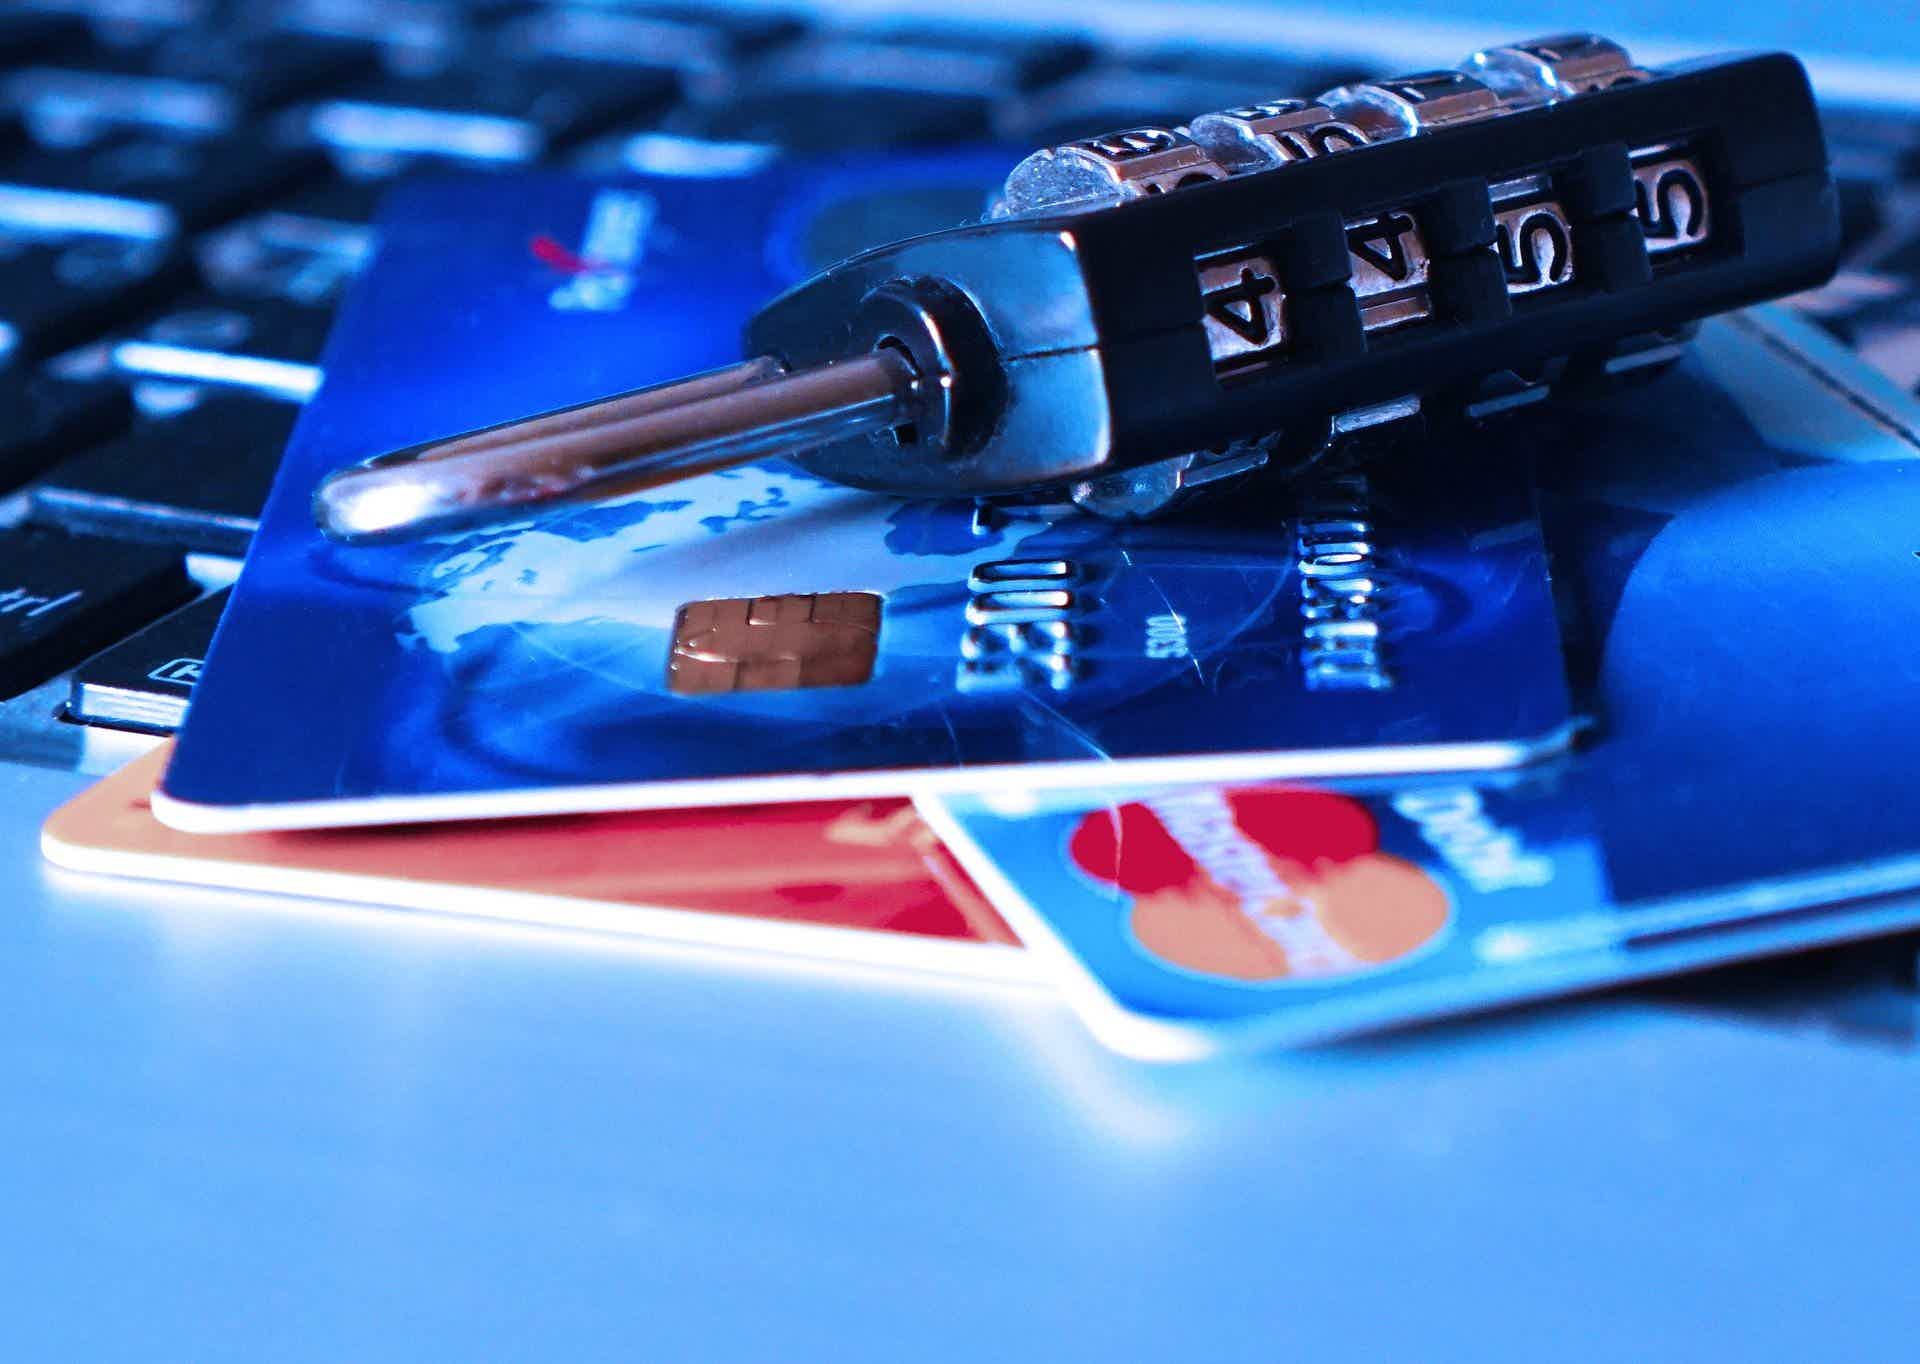 Rebuild credit with one of these 10 best secured credit cards! Source: Pixabay